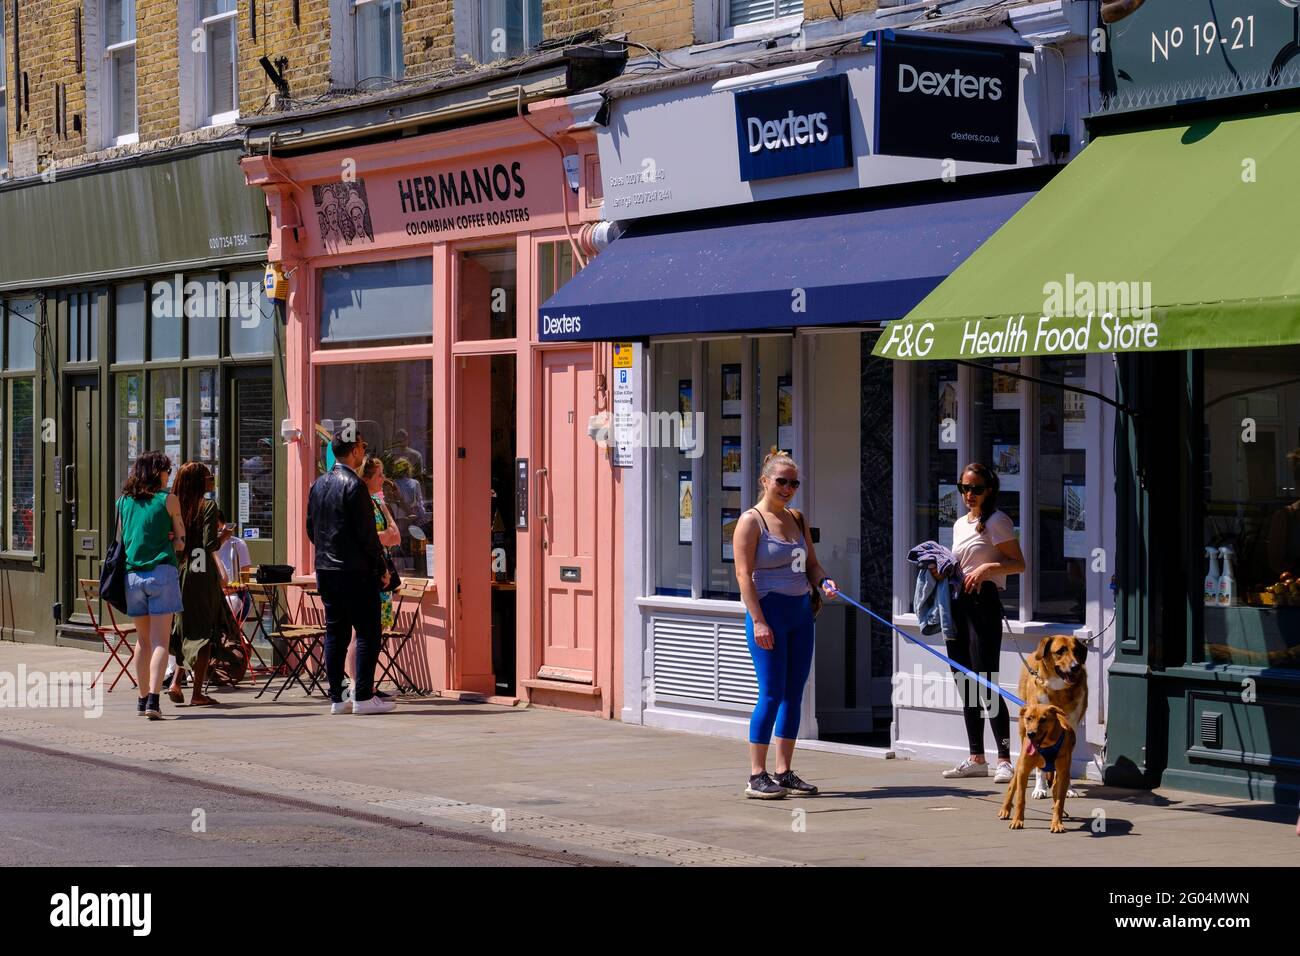 People enjoy warm summer day after covi-19 lockdown restrictions are being lifted and economy is opening up, Broadway Market, London, United Kingdom Stock Photo